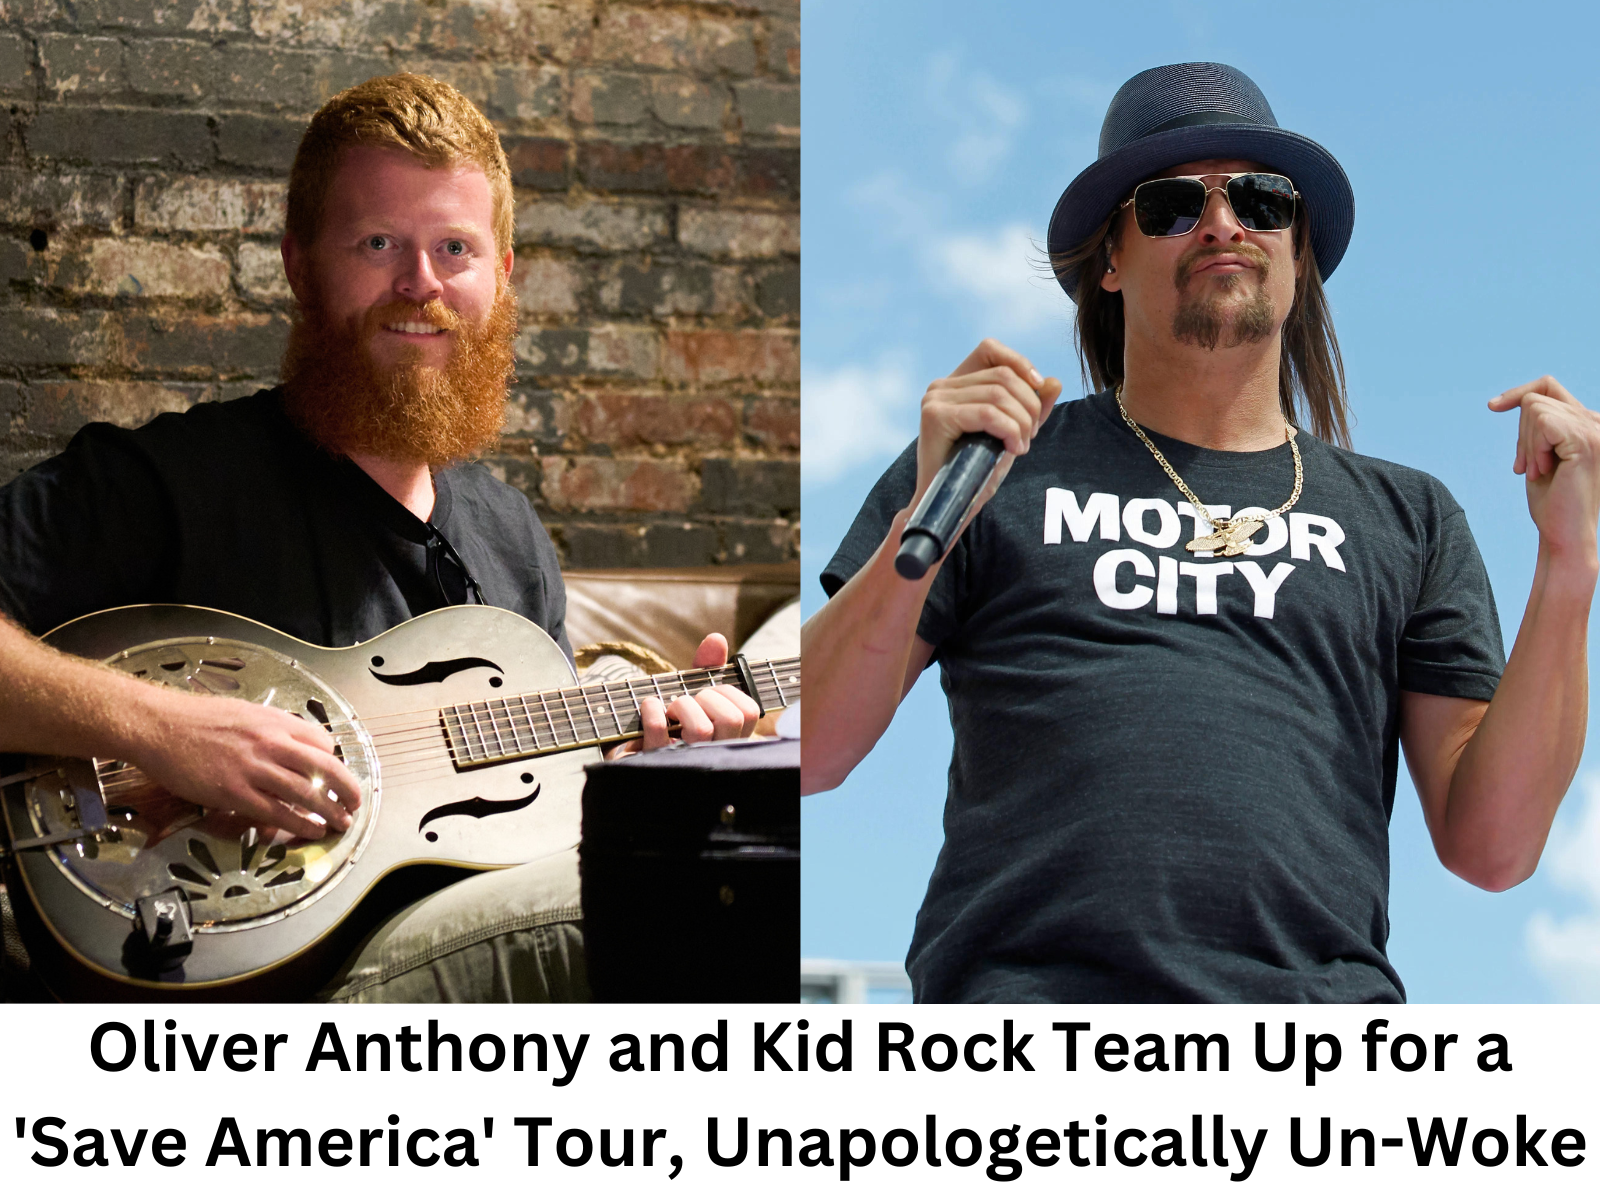 Un-Woke Warriors: Oliver Anthony and Kid Rock Unite for ‘Save America’ Tour